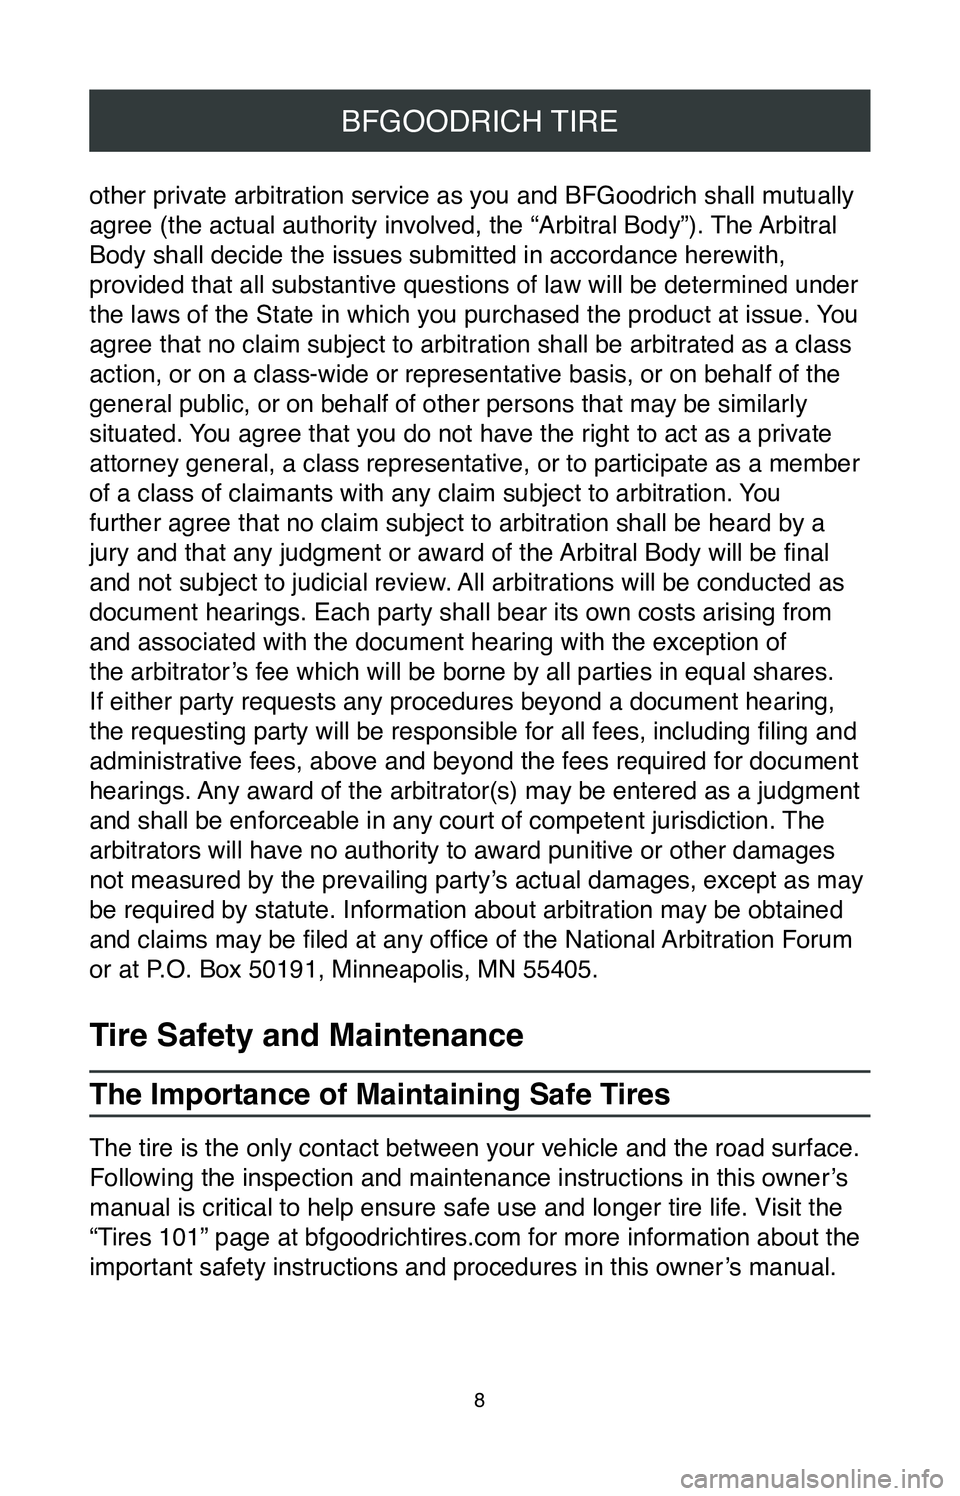 TOYOTA SEQUOIA 2020  Warranties & Maintenance Guides (in English) 8
BFGOODRICH TIRE
other private arbitration service as you and BFGoodrich shall mutually 
agree (the actual authority involved, the “Arbitral Body”). The Arbitral 
Body shall decide the issues sub